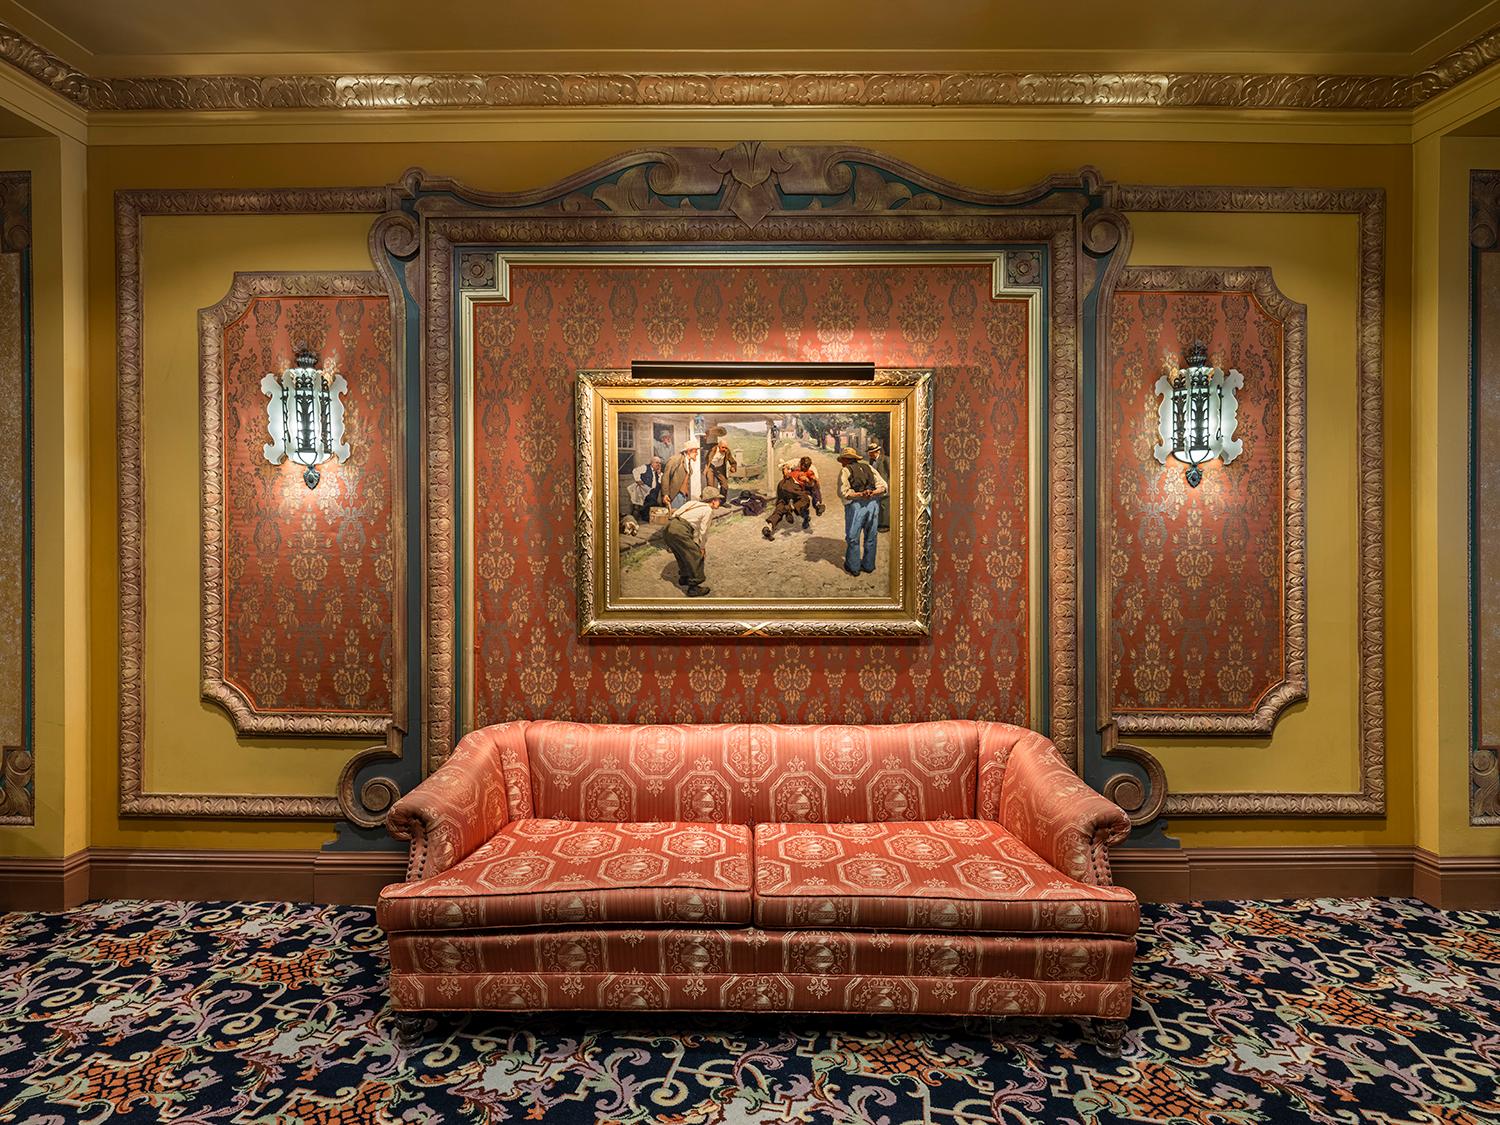 As one of the last opulent picture-palaces built before the Great Depression in 1931, the LA Theatre was erected in less than six months in a French Baroque style and is reminiscent of the Hall of Mirrors in Versailles. The nearly four-story grand